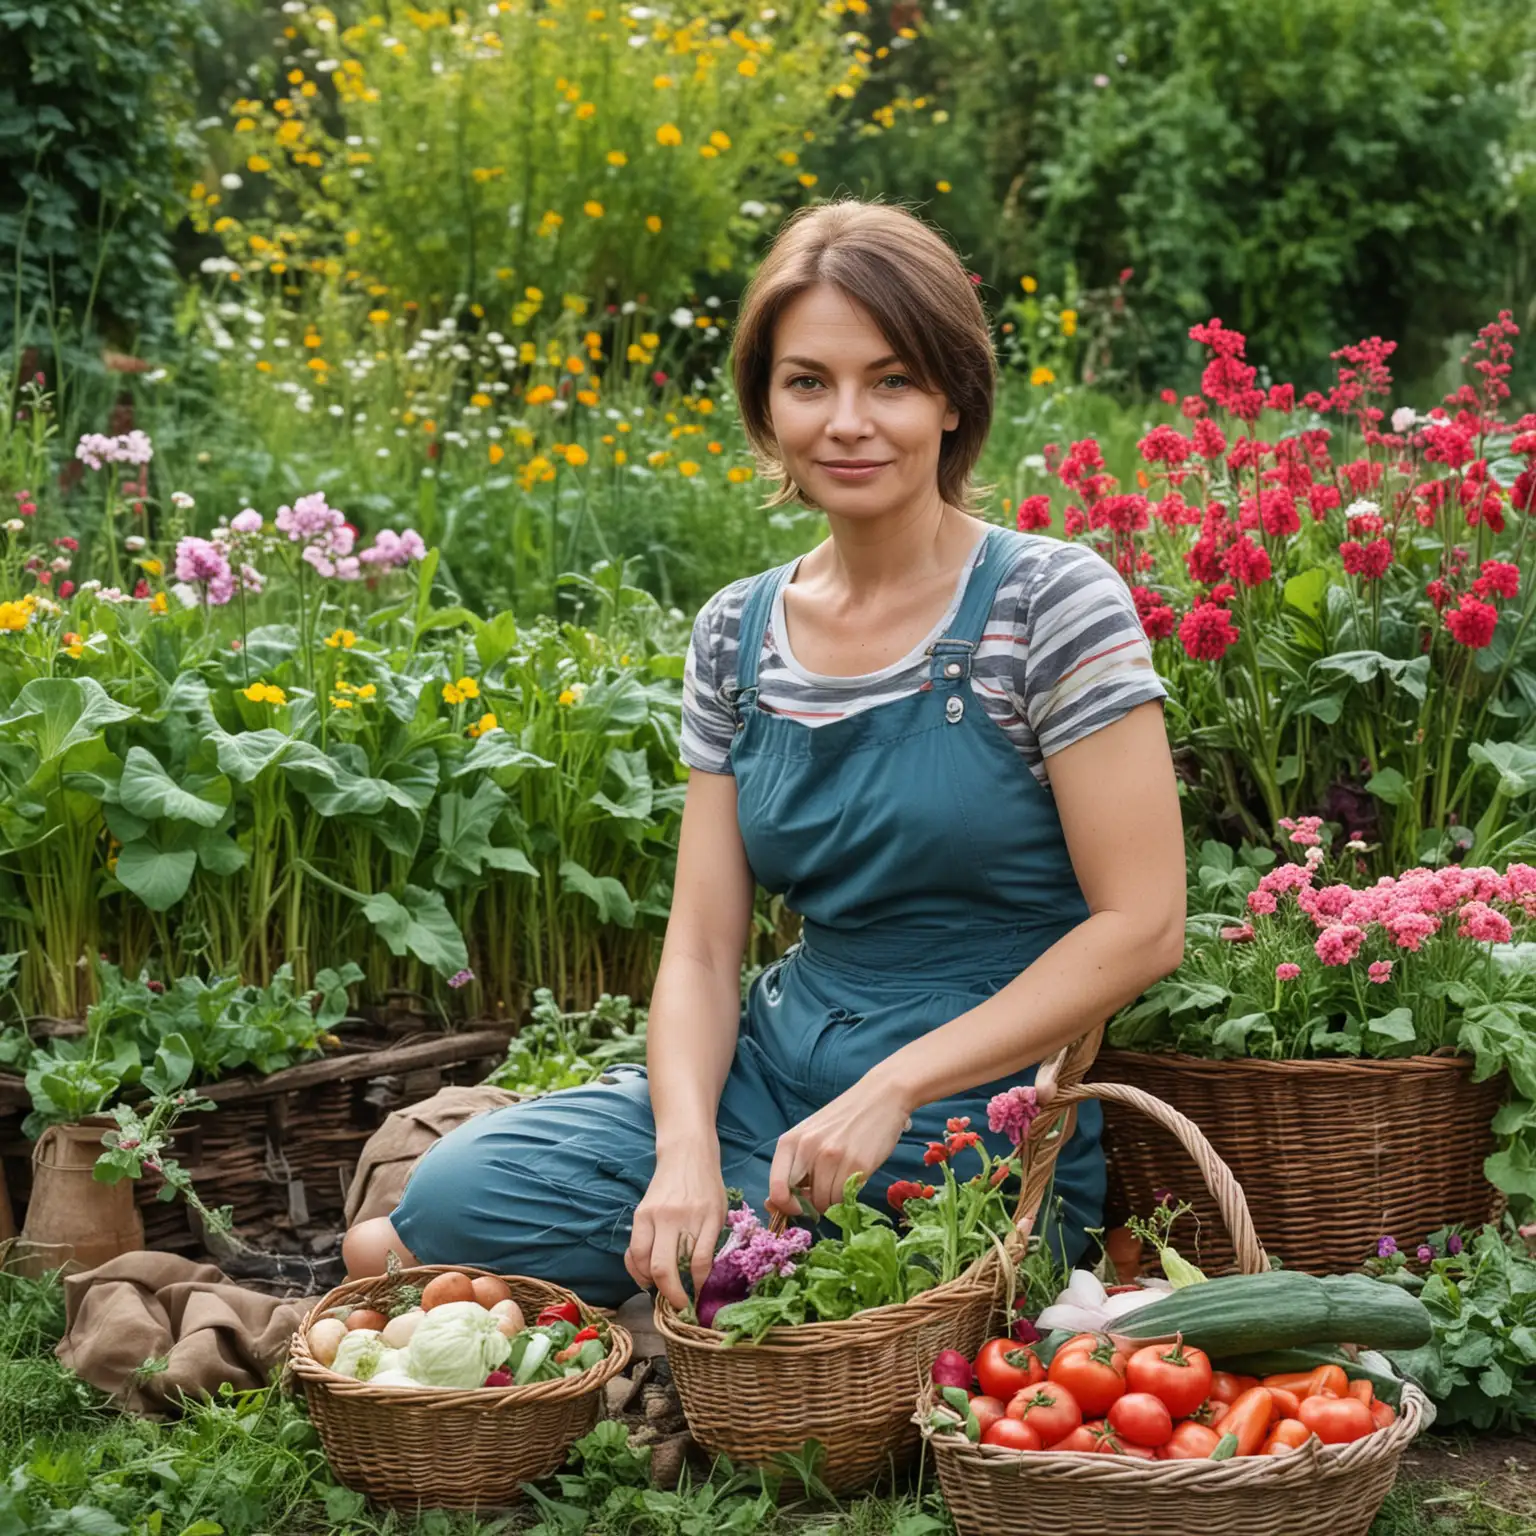 a woman, Russian, 40-45 years old, gardeners, sitting in the garden, flowers on the background, in front of her a basket of vegetables